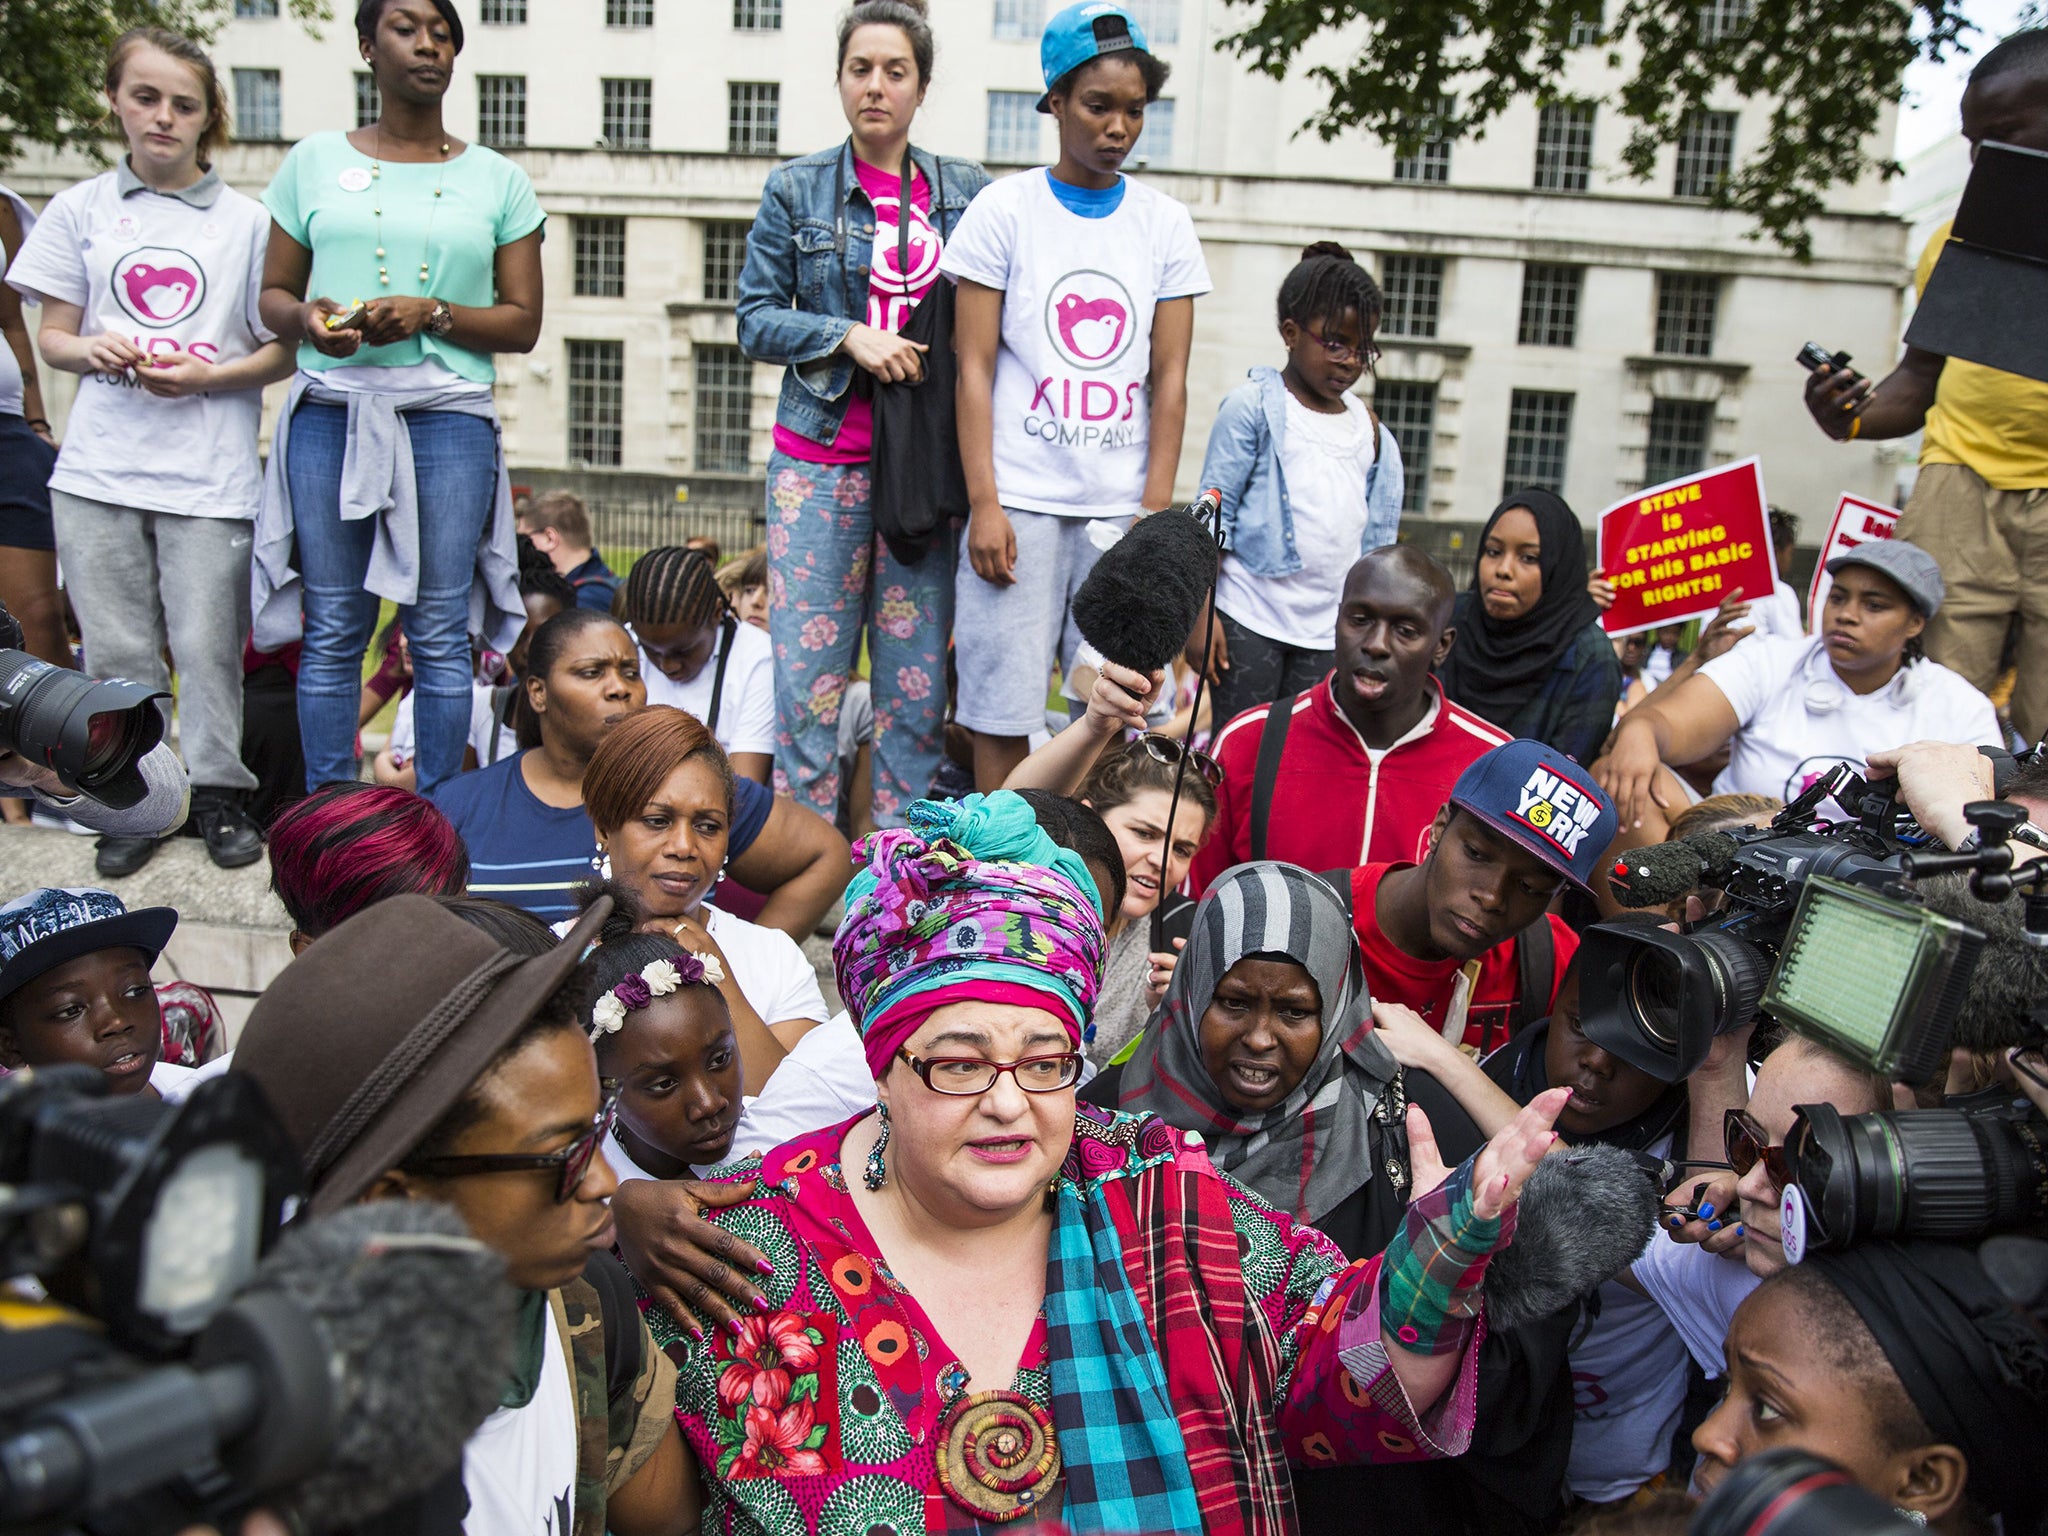 Kids Company, founded by Camila Batmanghelidjh, received two major Government grants this year, totalling £7.2m